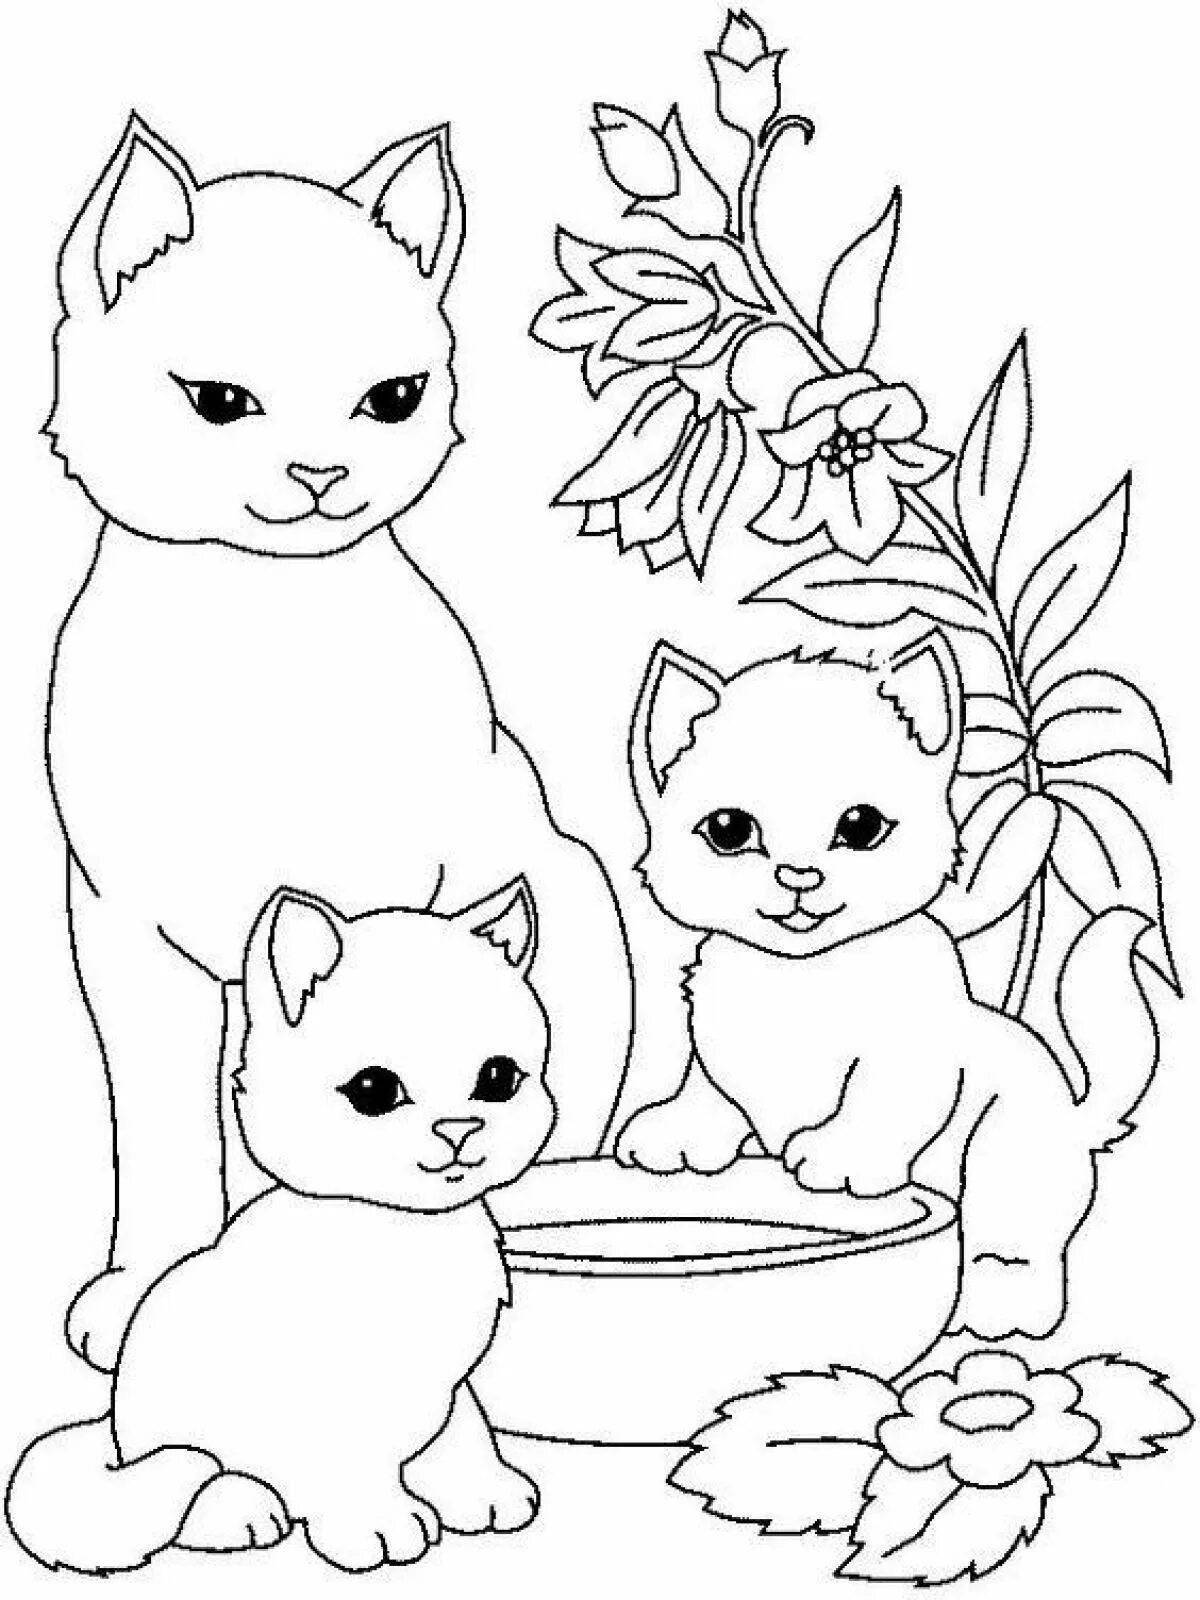 Adorable kitty coloring book for kids